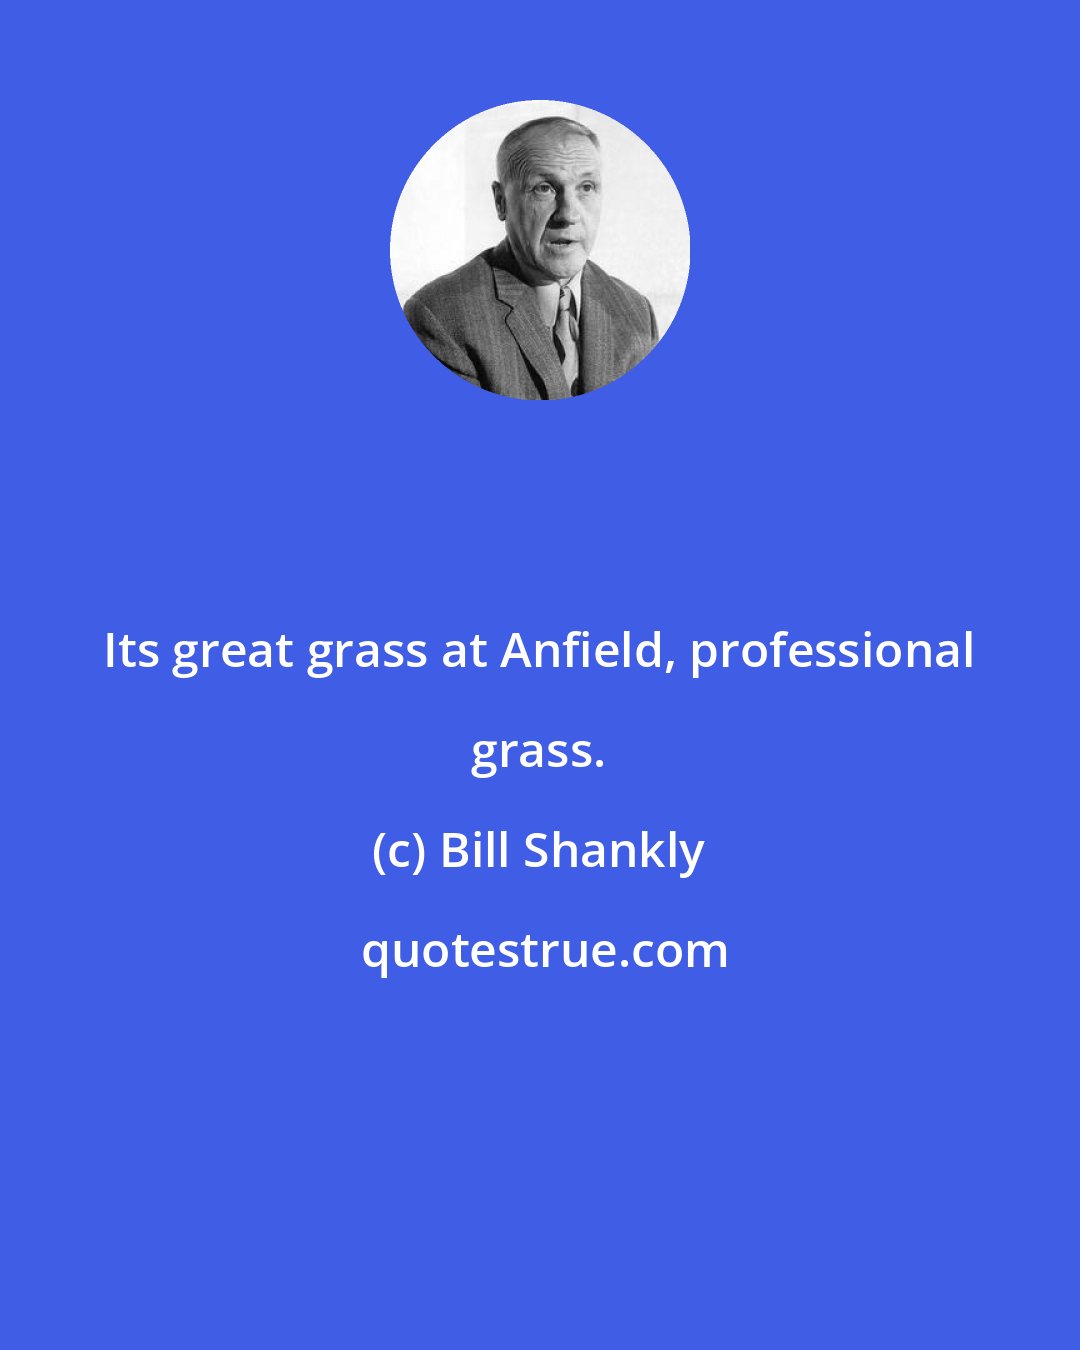 Bill Shankly: Its great grass at Anfield, professional grass.